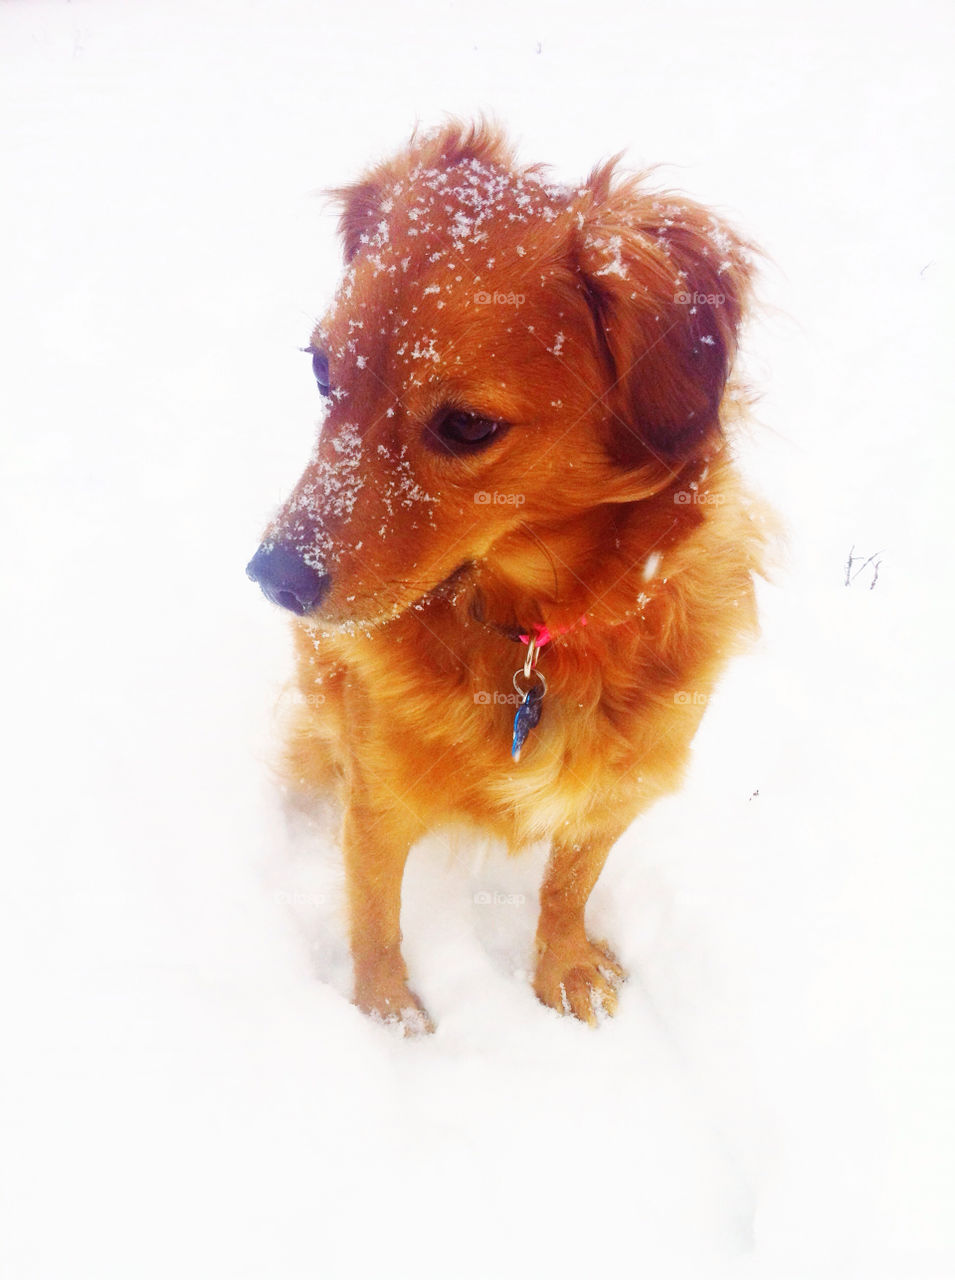 snow winter dog puppy by toddthehandguy